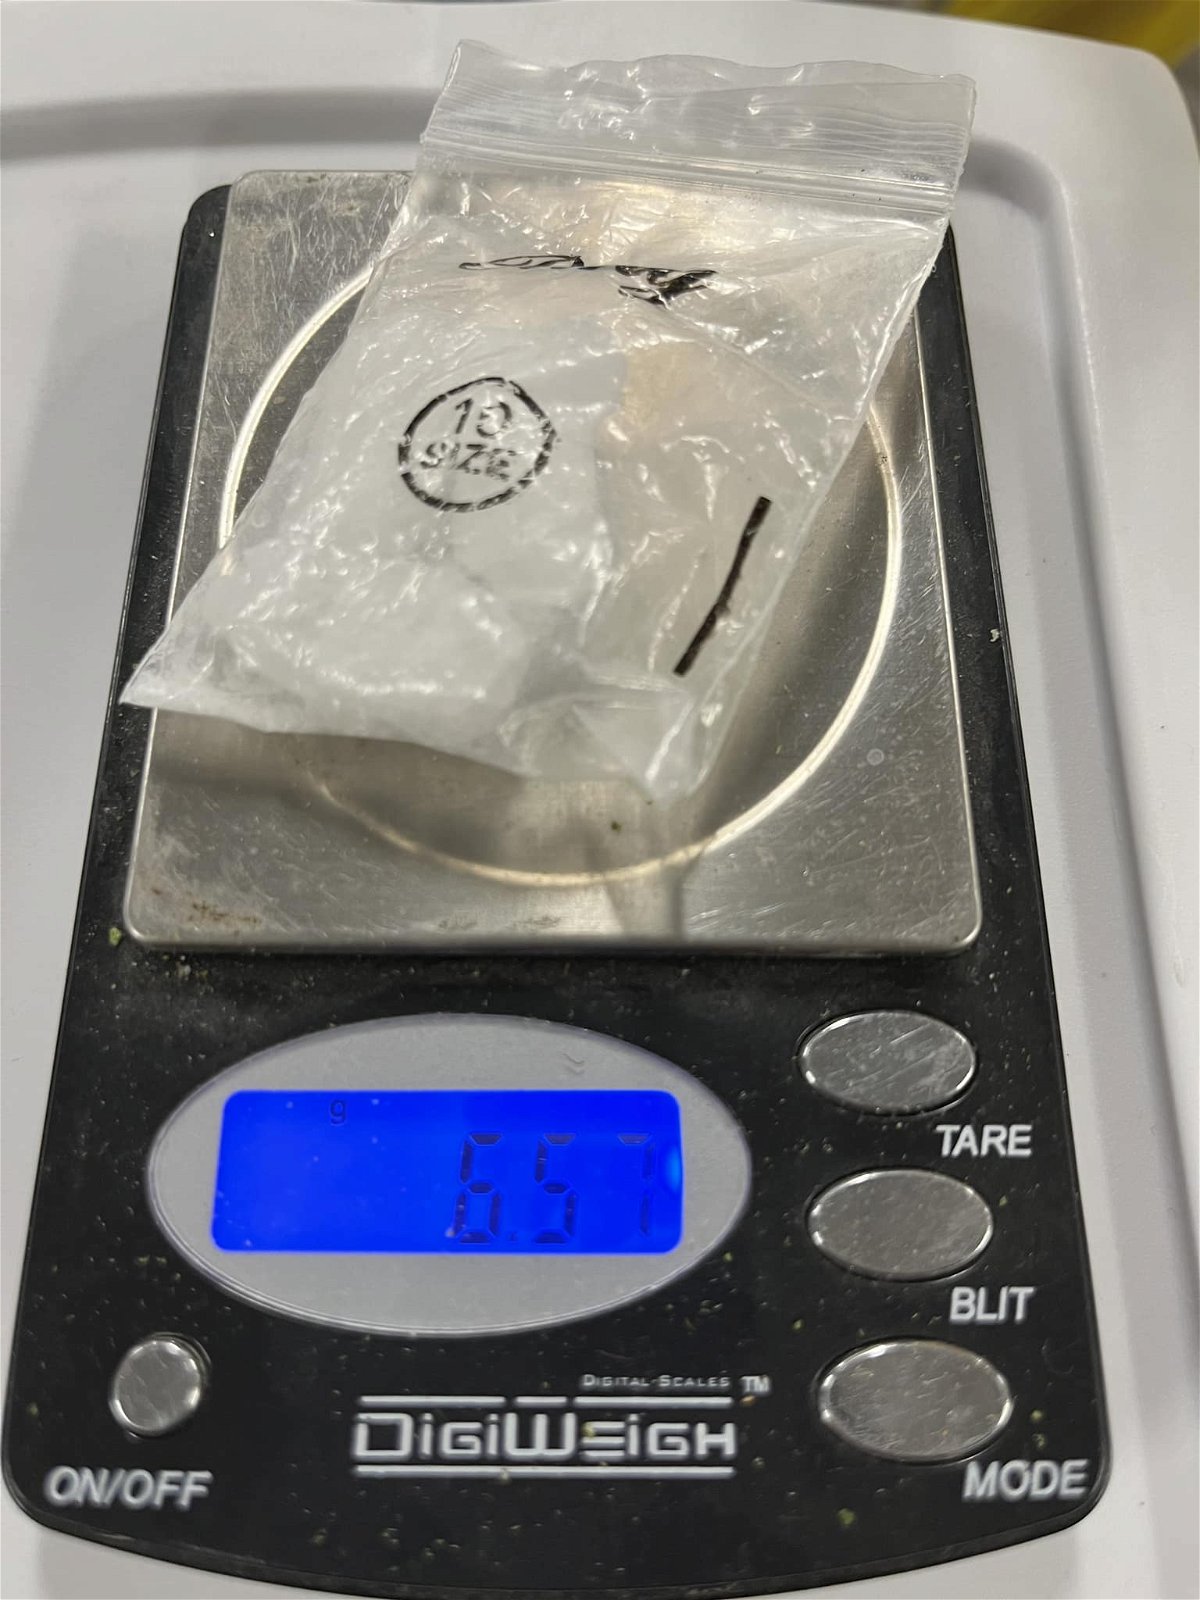 Officials say over six pounds of meth were found during a search warrant, according to the Callaway County Sheriff's Office.